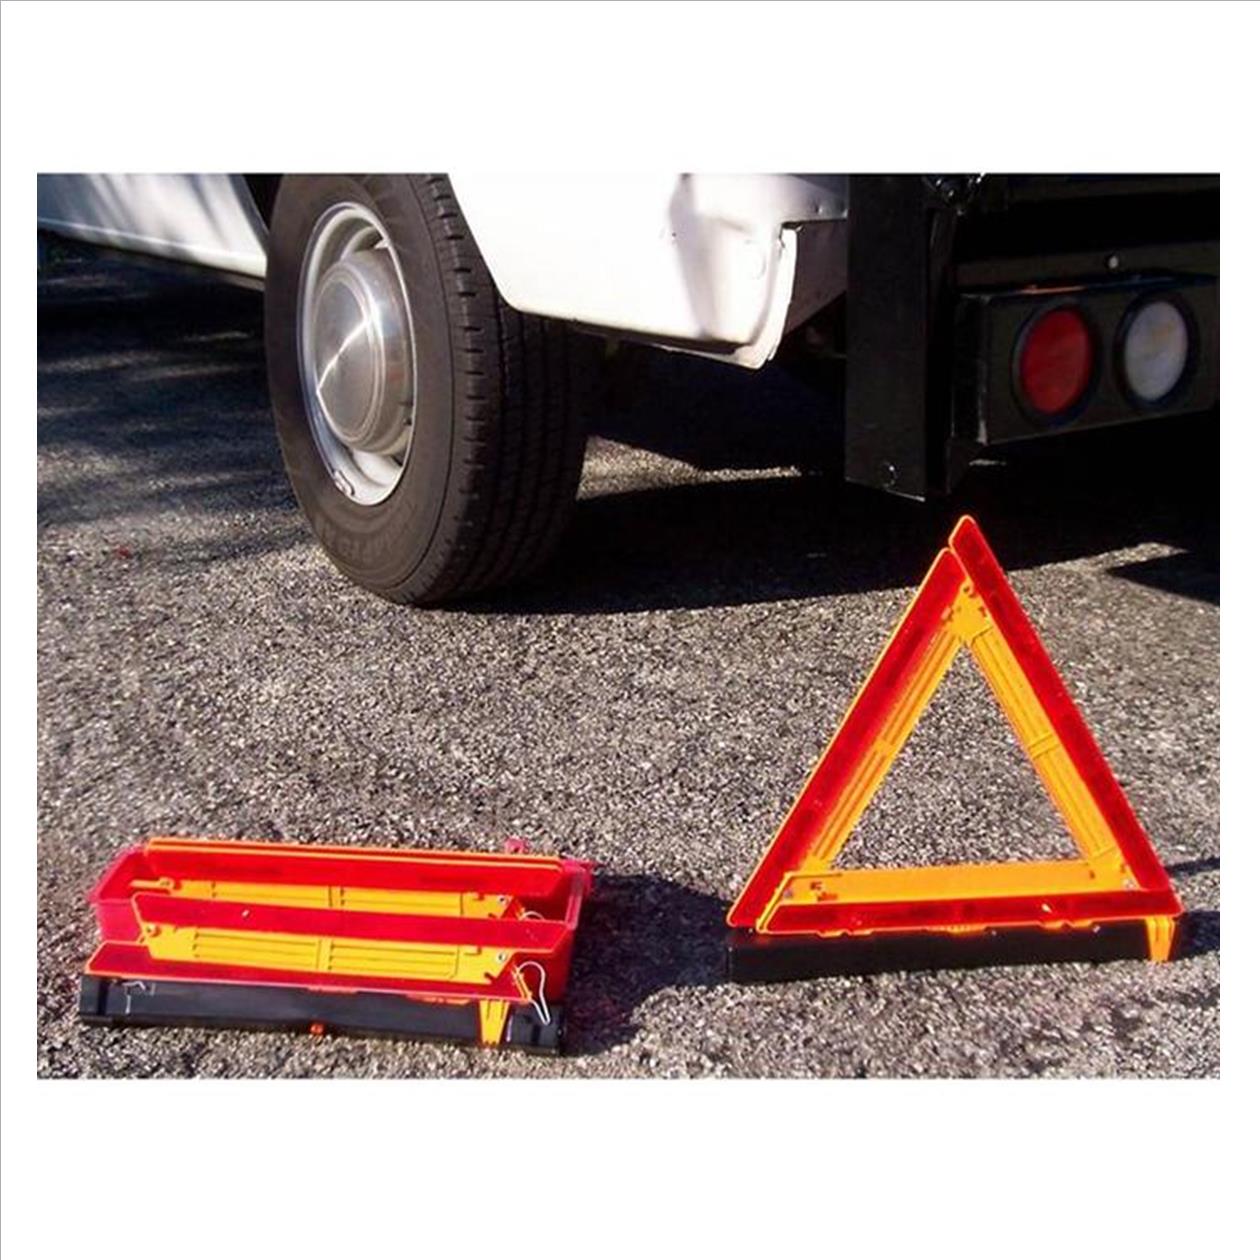 Plastic 4.5 x 18 x 17 Cortina Safety Products Group 95-03-009 Cortina Safety Products Fluorescent Orange Acrylic 3-Piece Triangle Warning Kit with